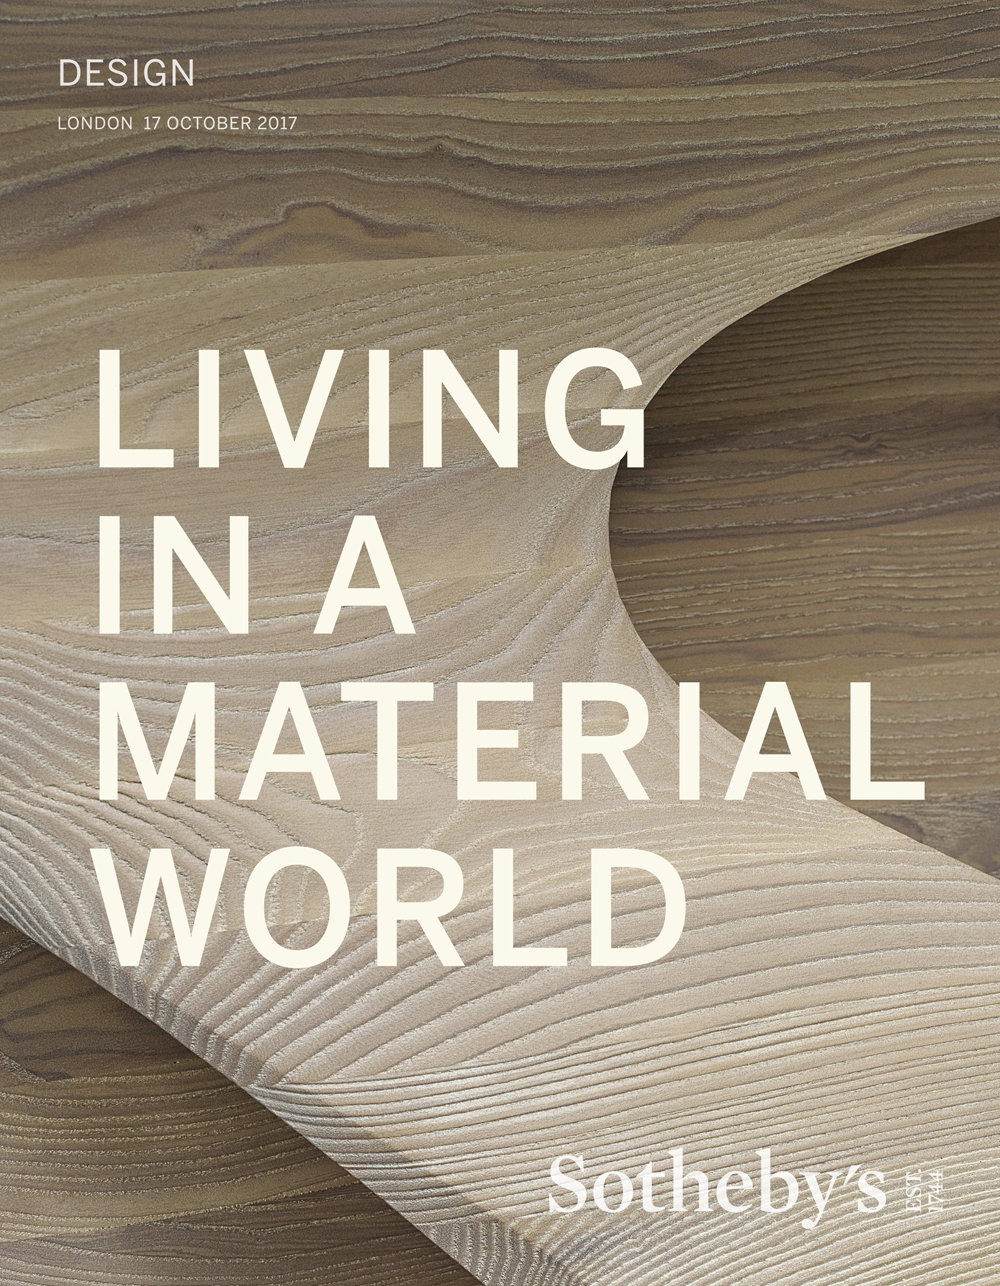 Sothebys_living in a material world_auction_1000px